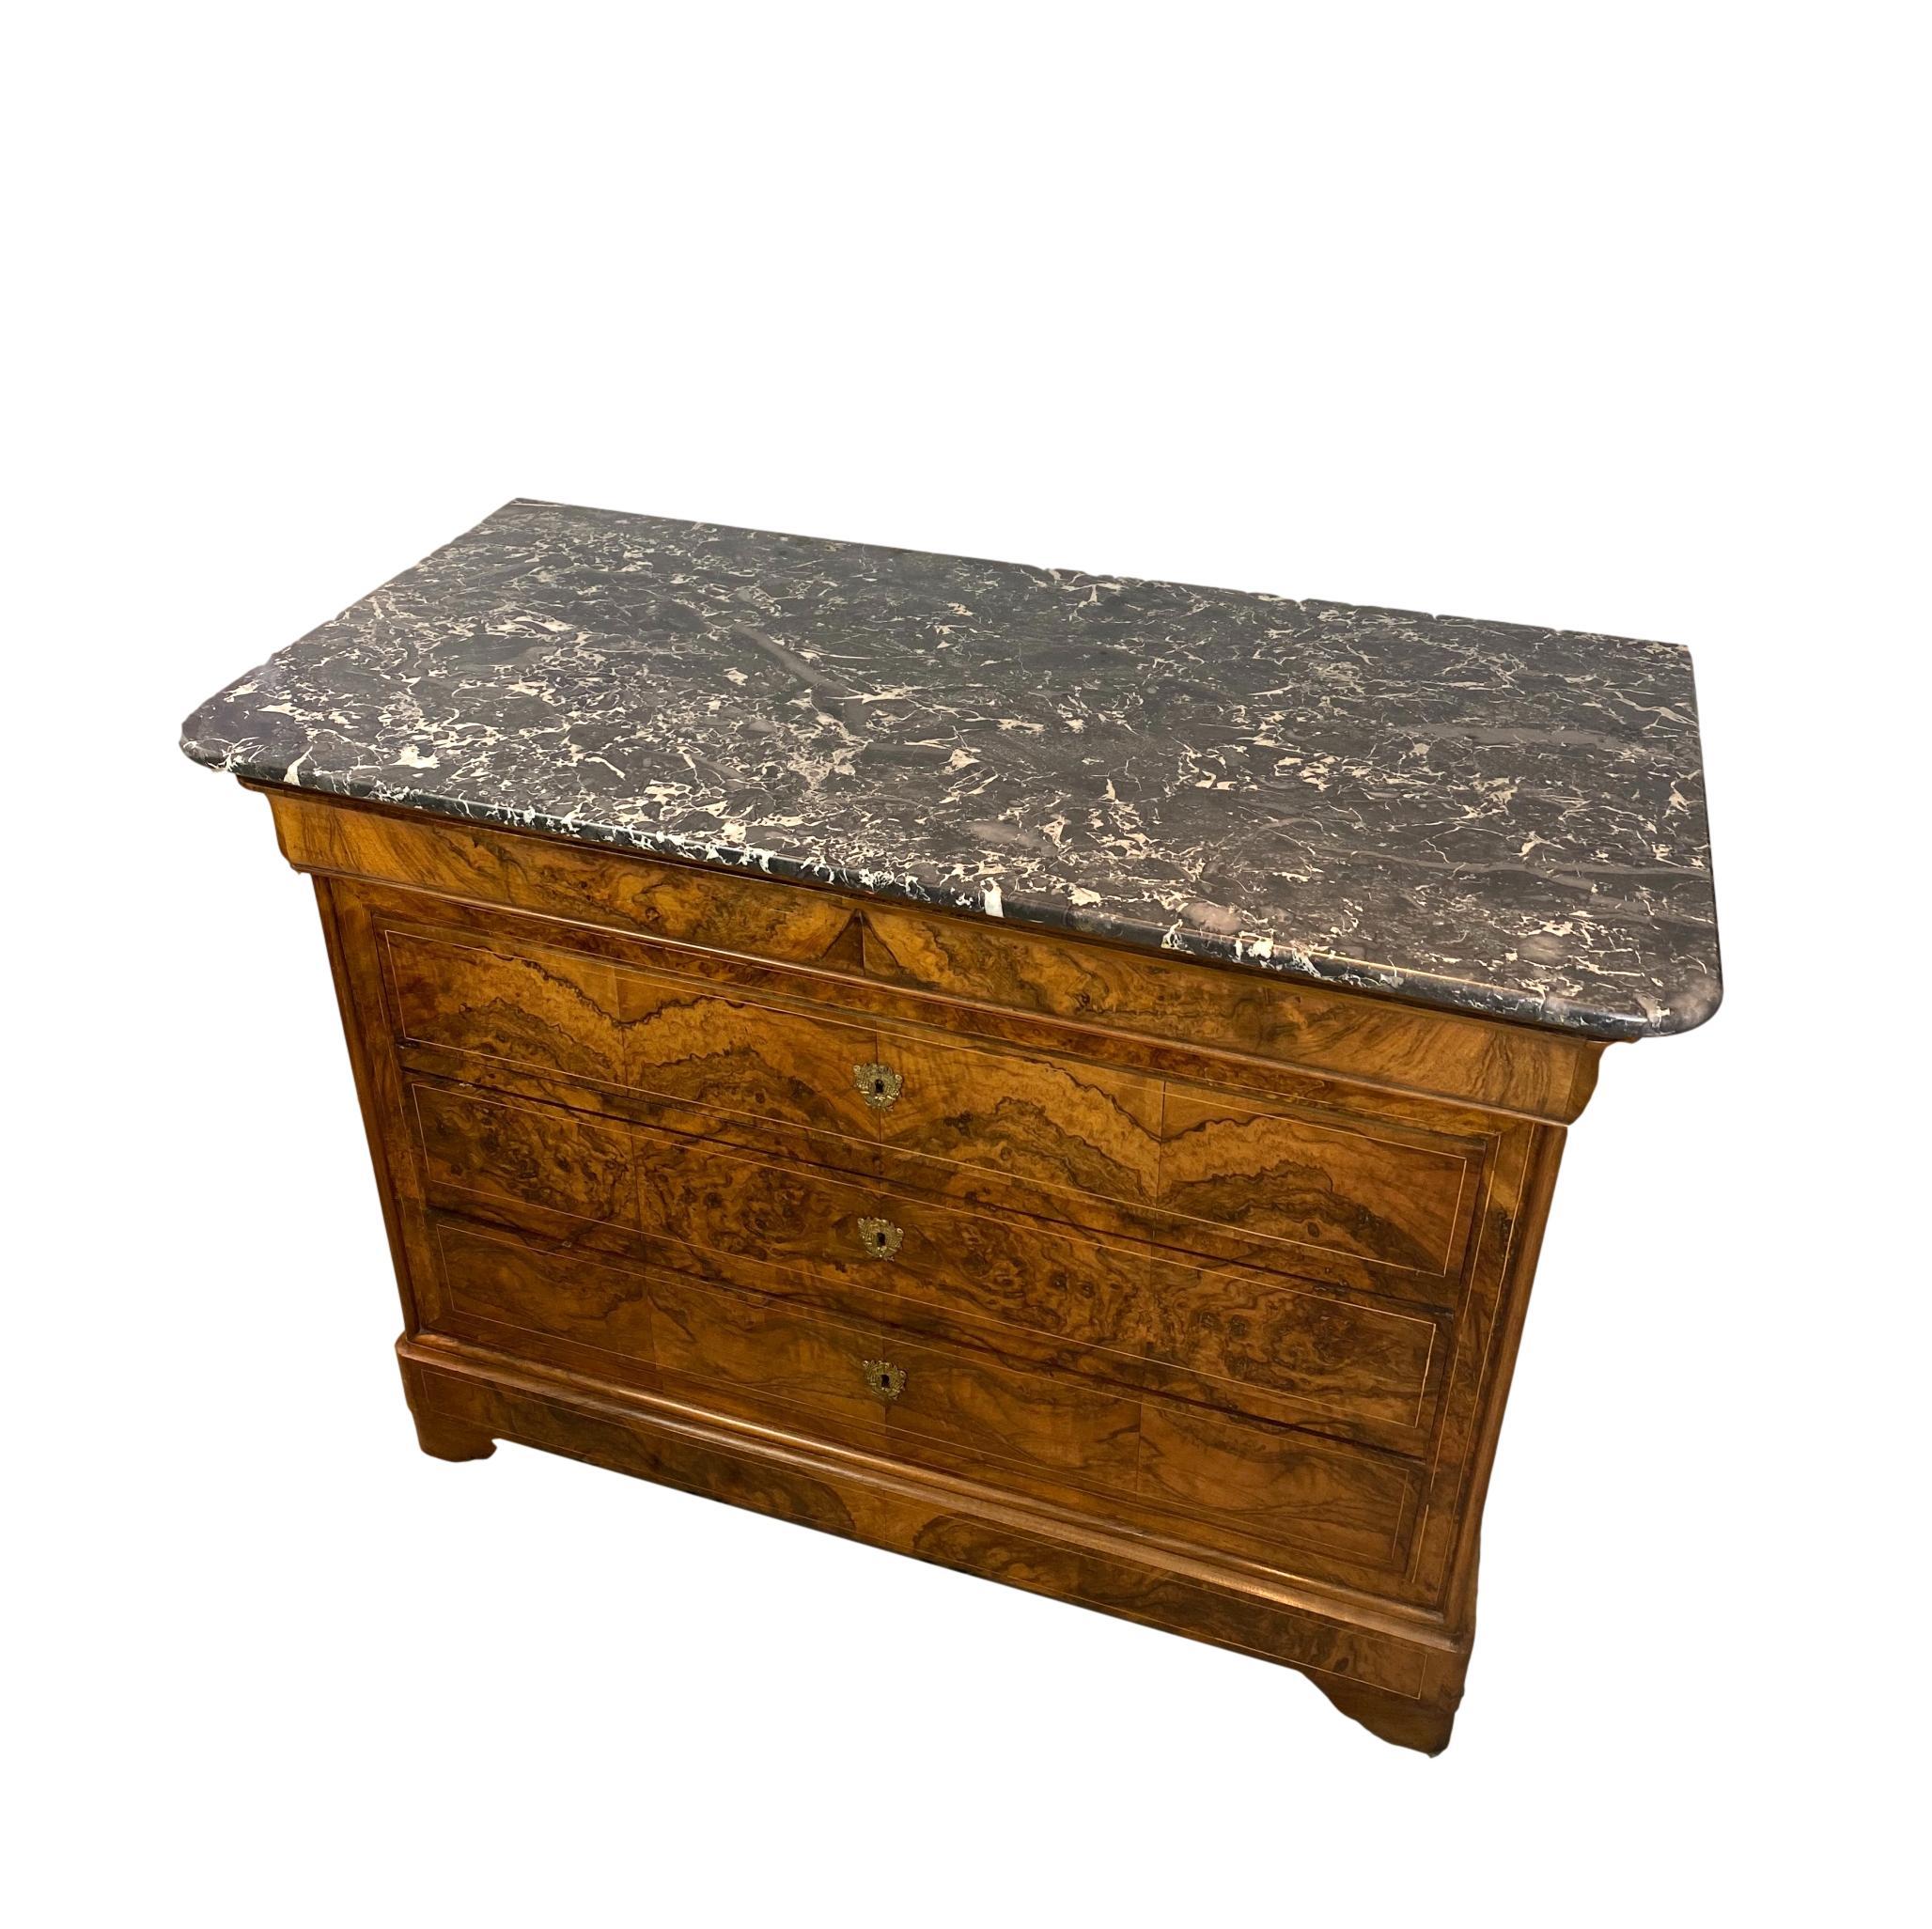 Louis Philippe commode in figured walnut with black and white nero marquina marble top, French,
circa 1840, with a single contoured frieze drawer, over three long drawers with gilt bronze escutcheons, on a conforming plinth base, with shaped